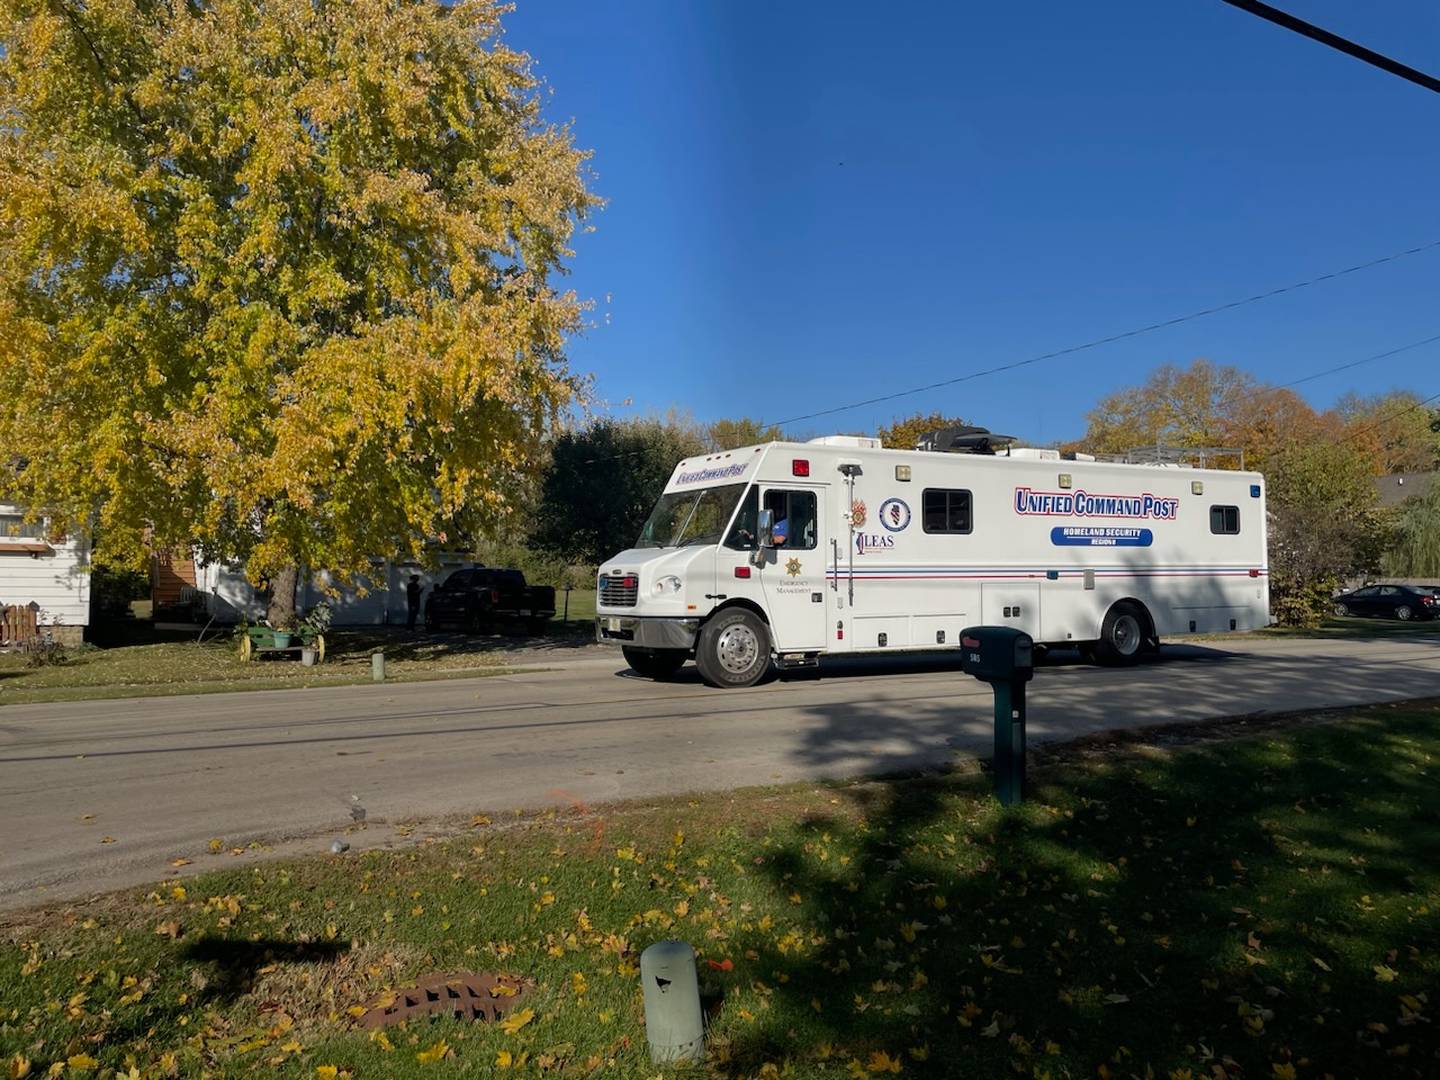 A tactical support vehicle arrives in Sheridan on Saturday, Oct. 22, 2022, as law enforcement is engaged in a standoff with a suspected gunman.